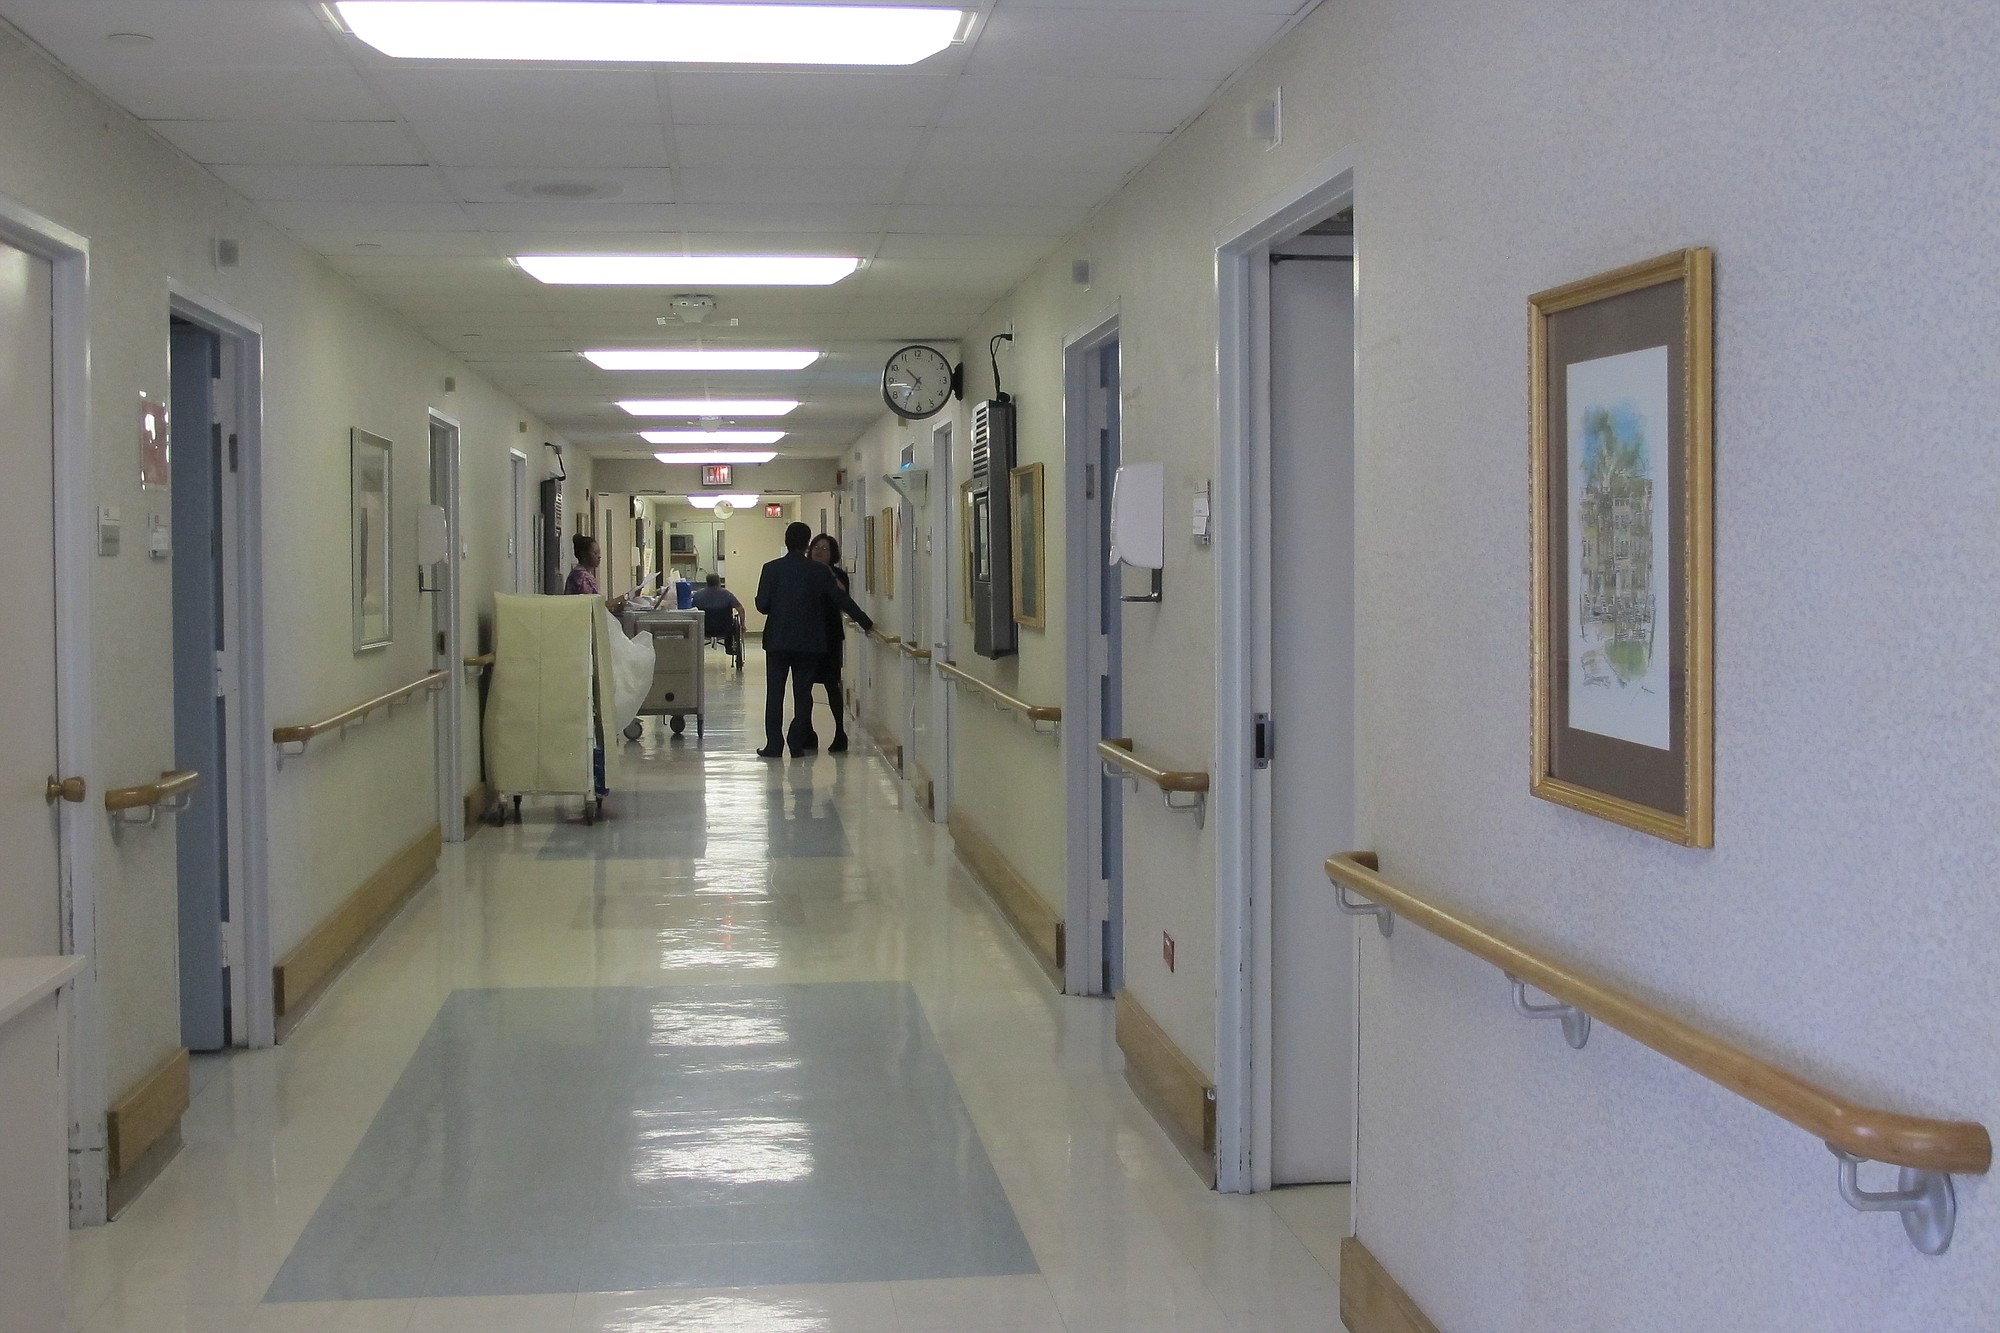 A hallway at the Jewish Home Lifecare nursing home in October in the Bronx, N.Y.